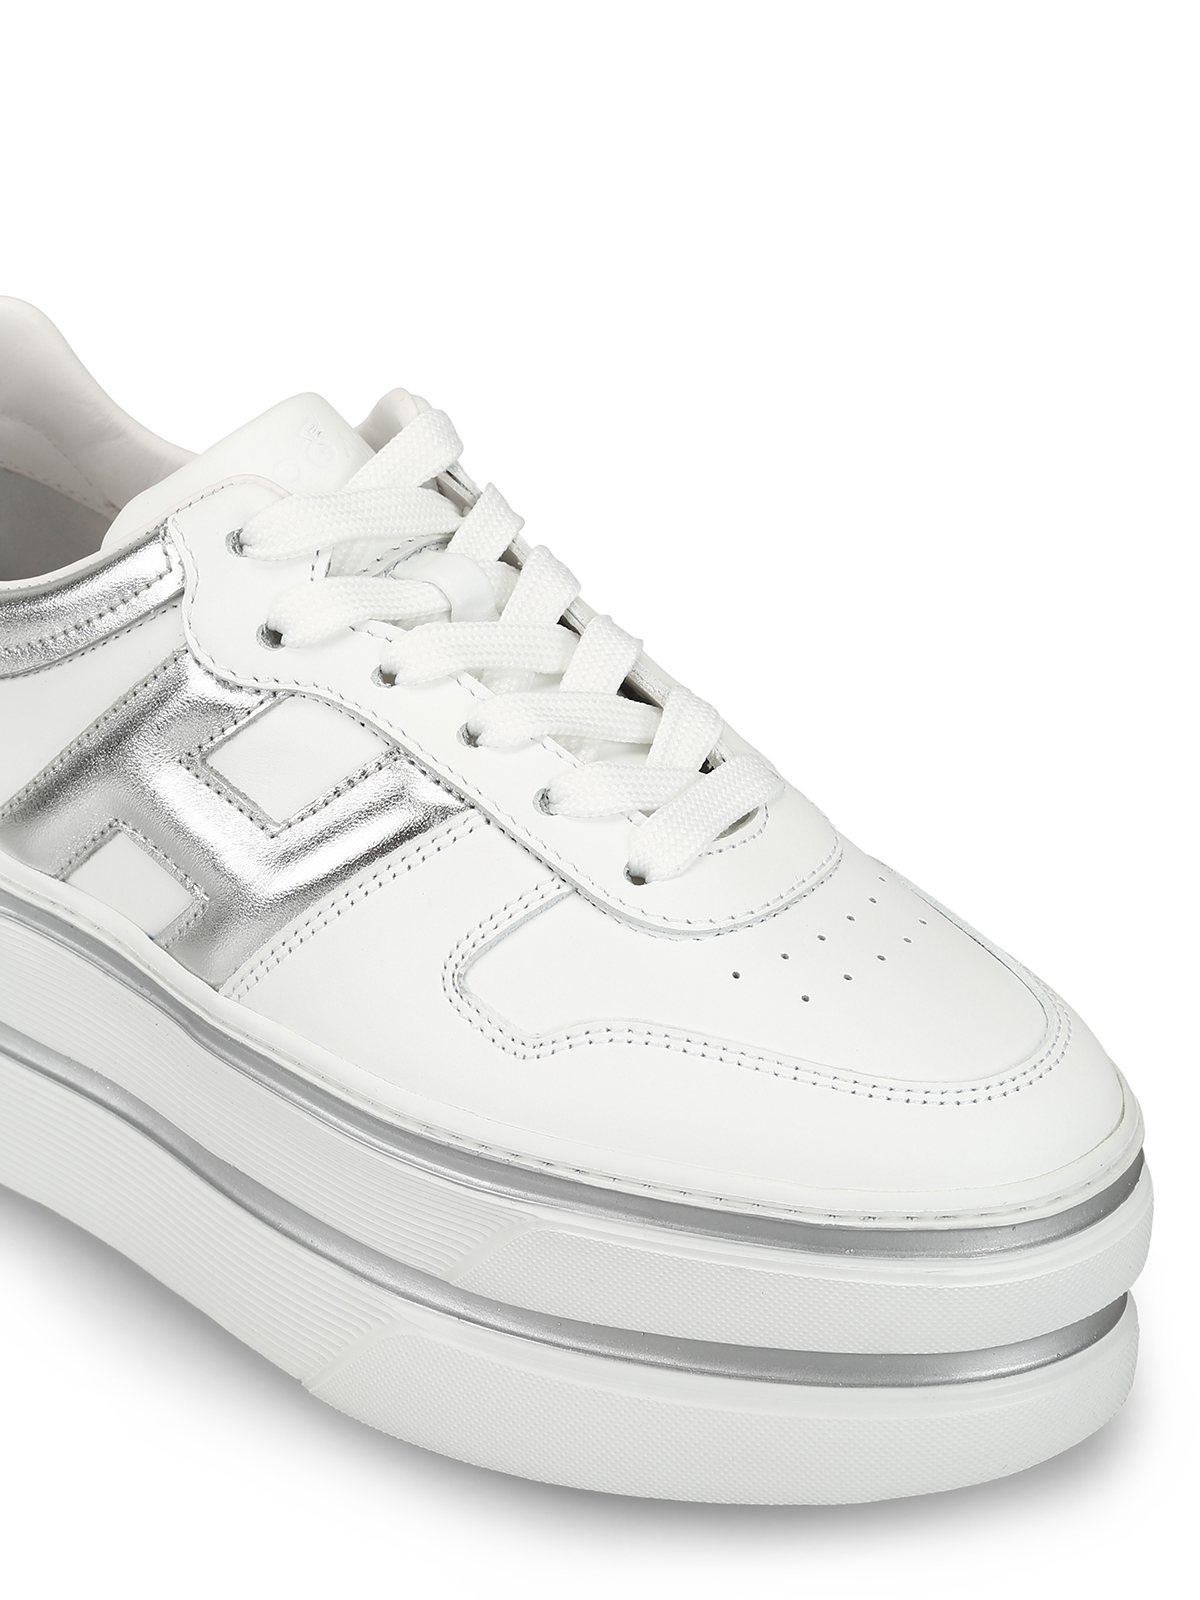 Trainers Hogan - H449 white leather oversized sneakers - GYW4490BS00I6W0351